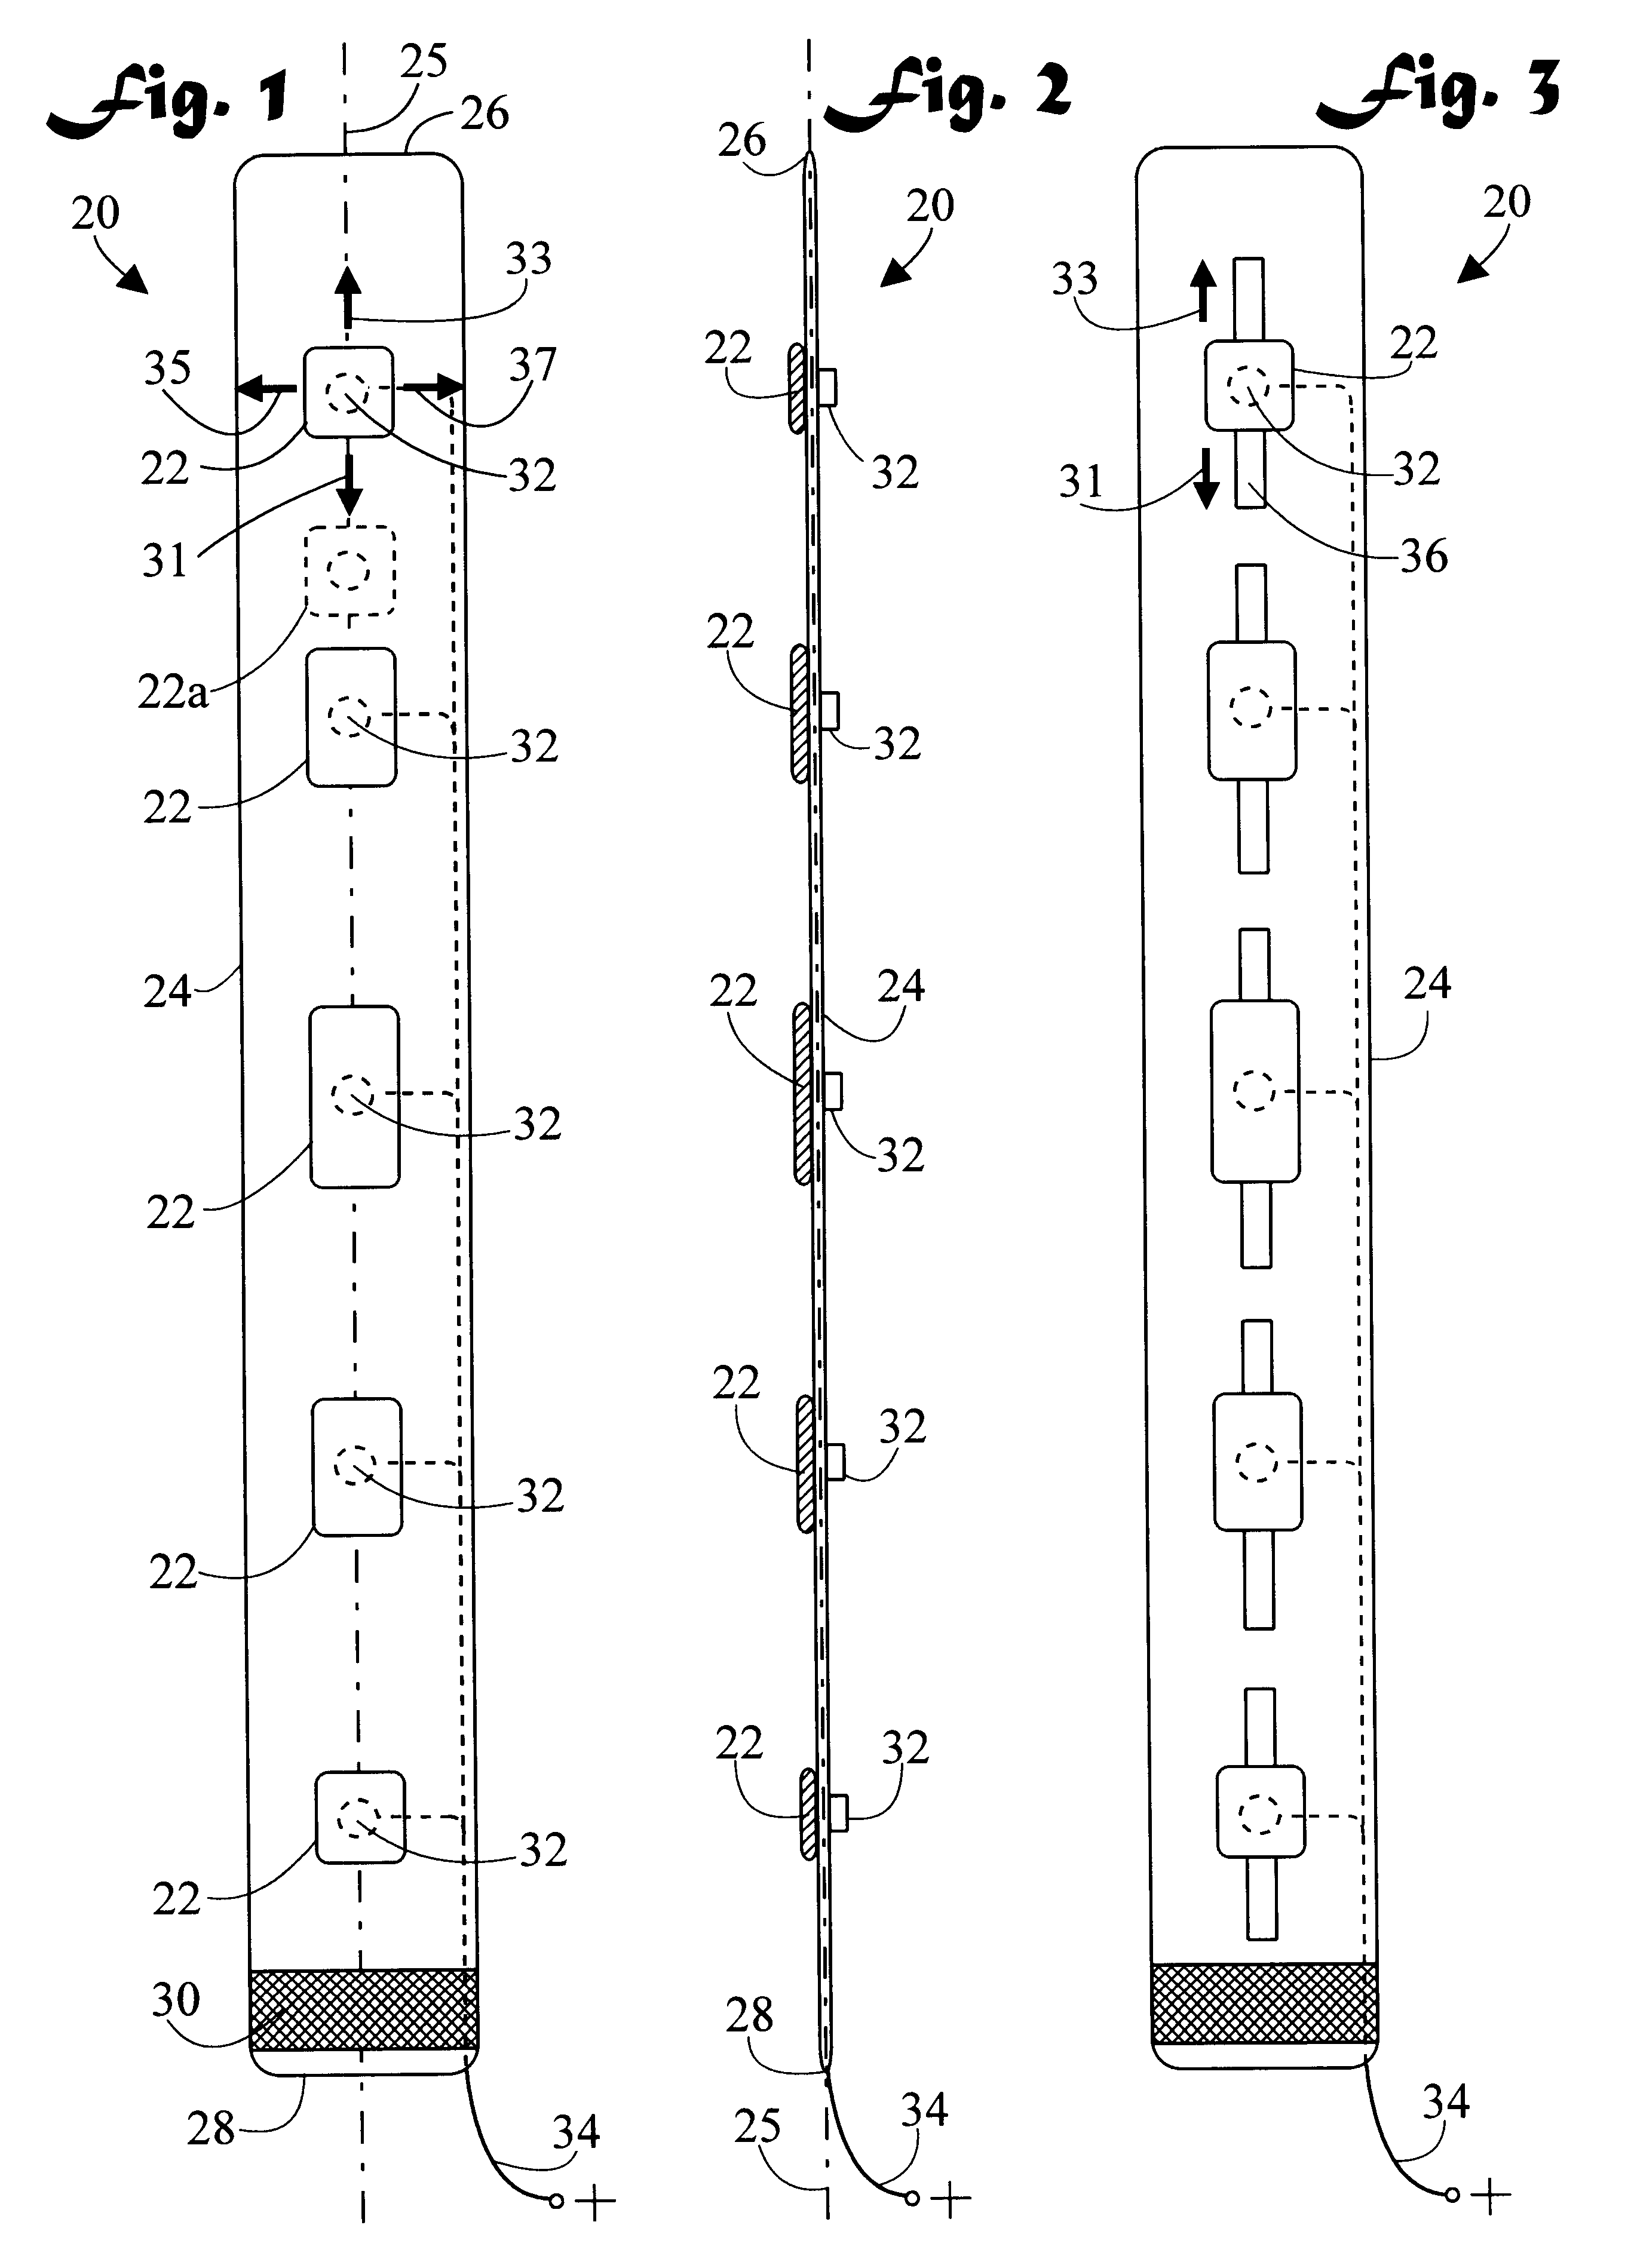 Device for administrating electro-muscle stimulation and method of use